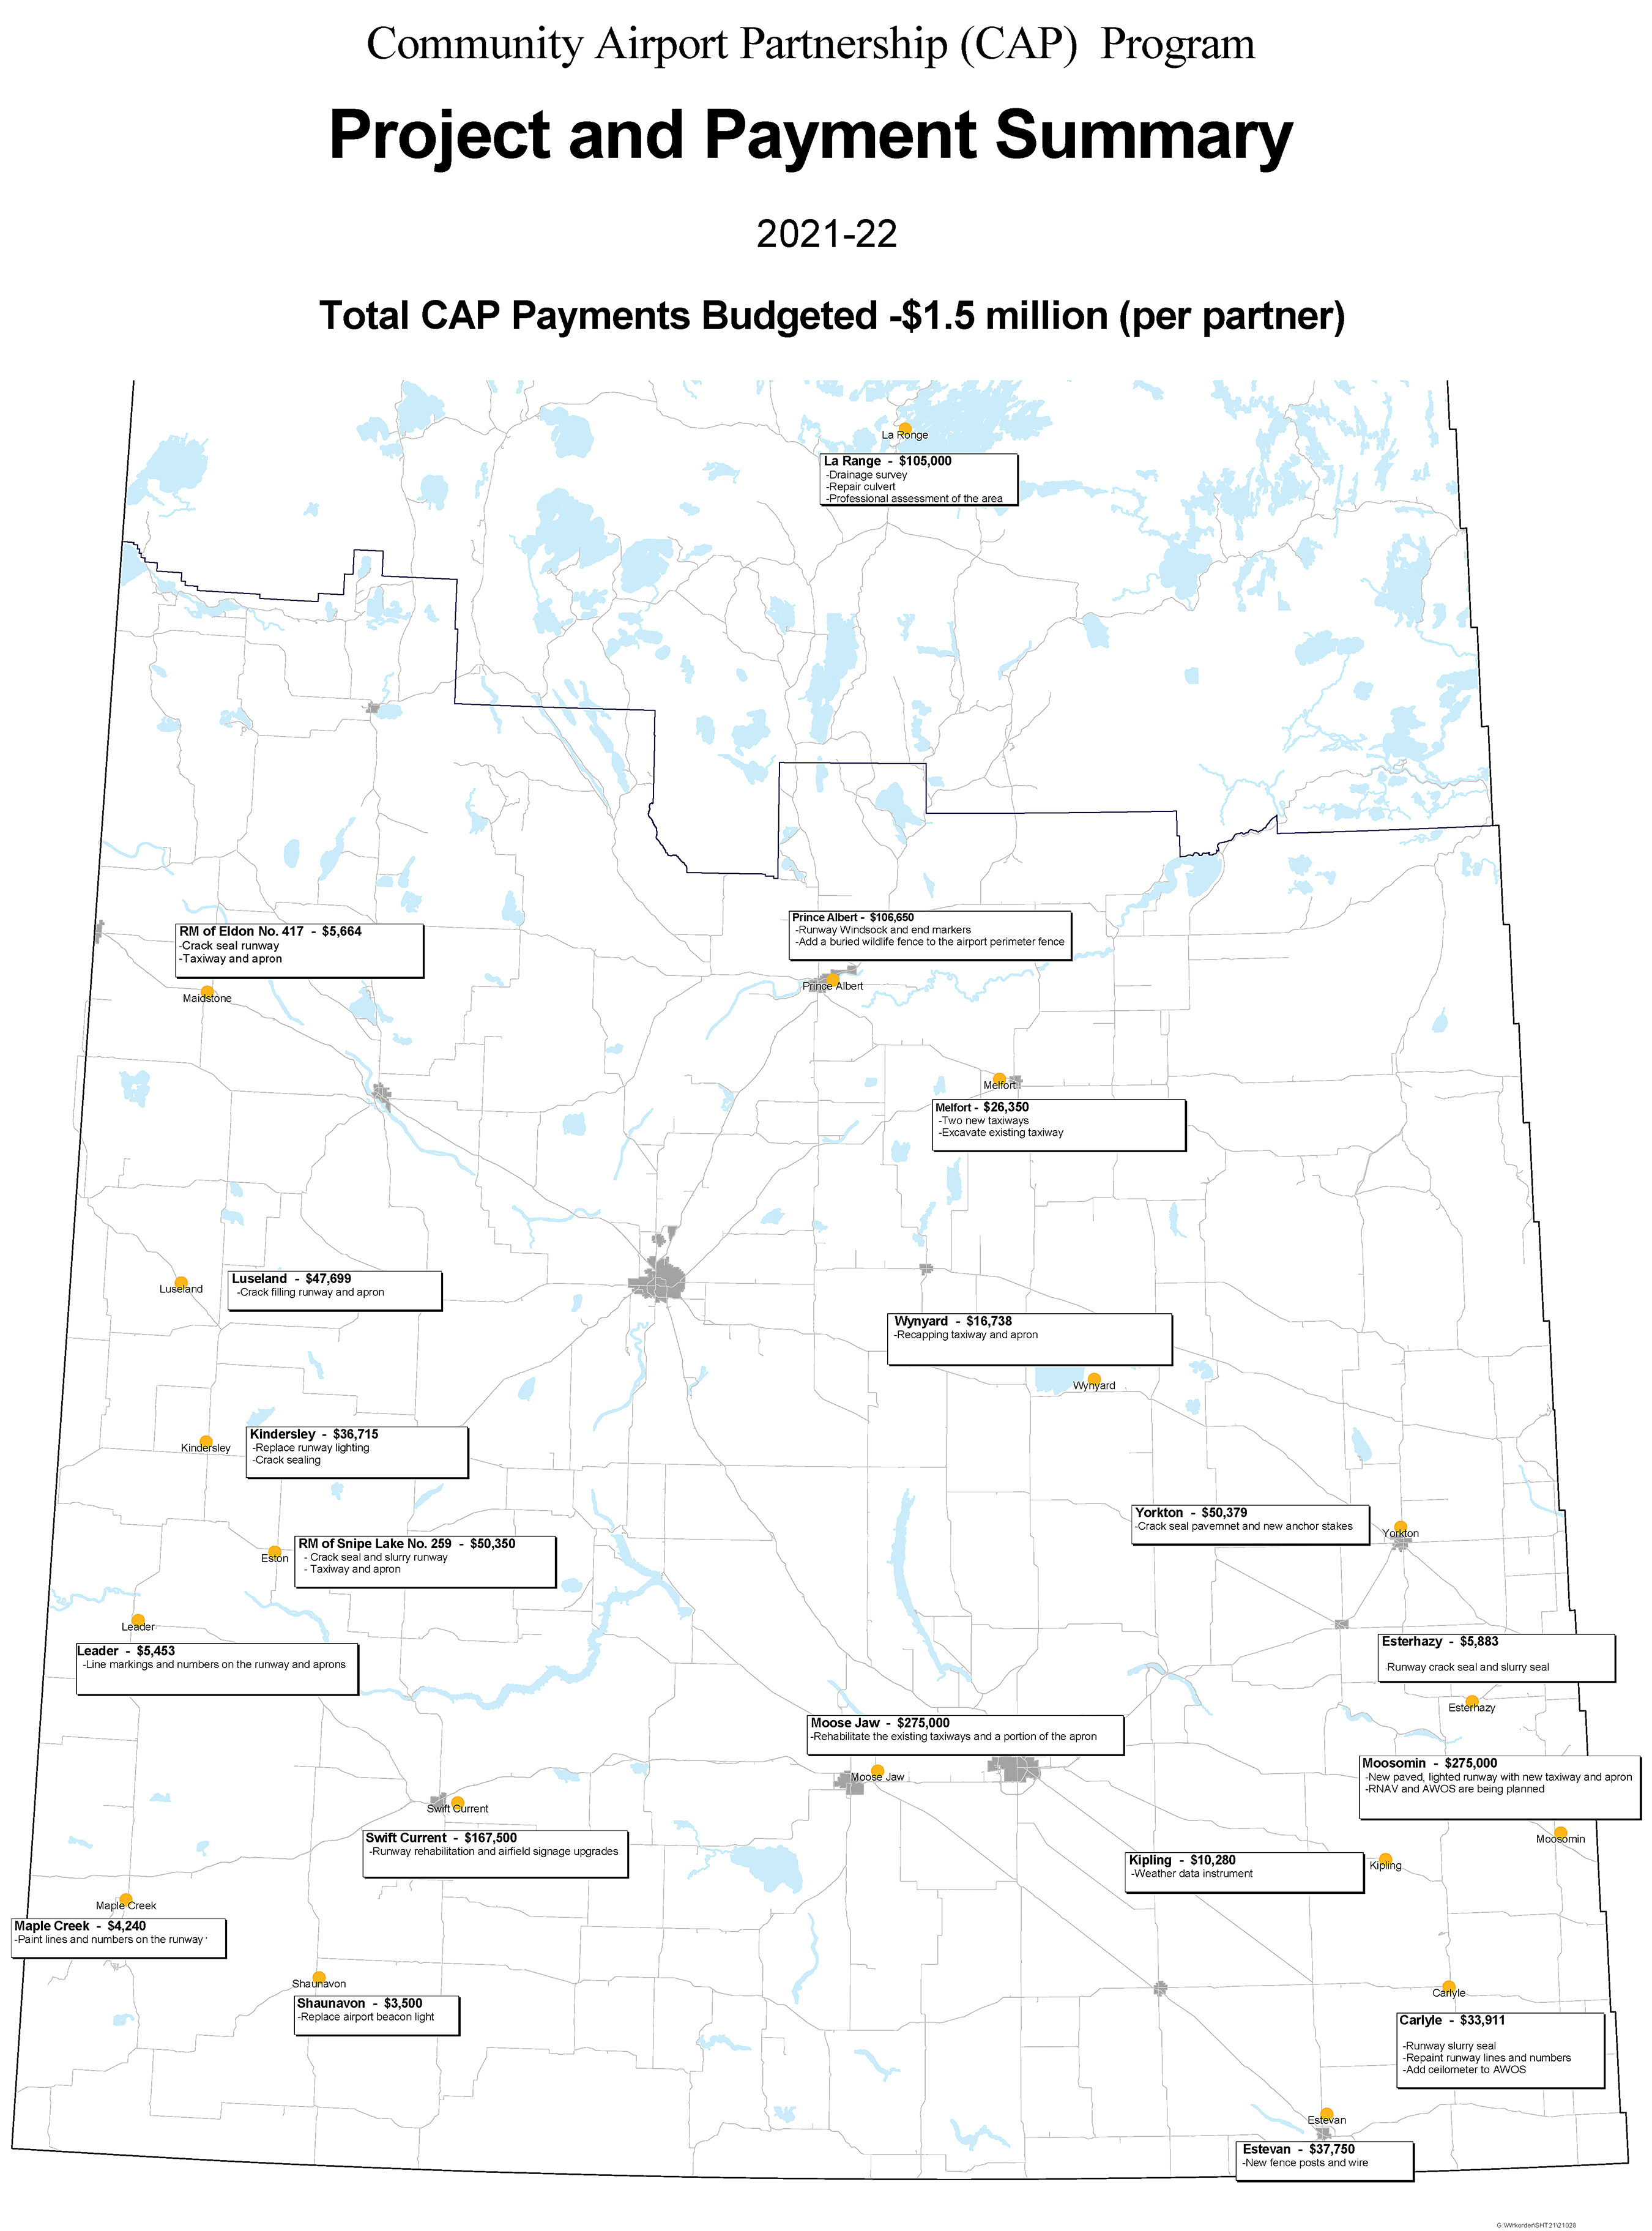 Projects in southeastern Saskatchewan that will receive CAP funding this year.